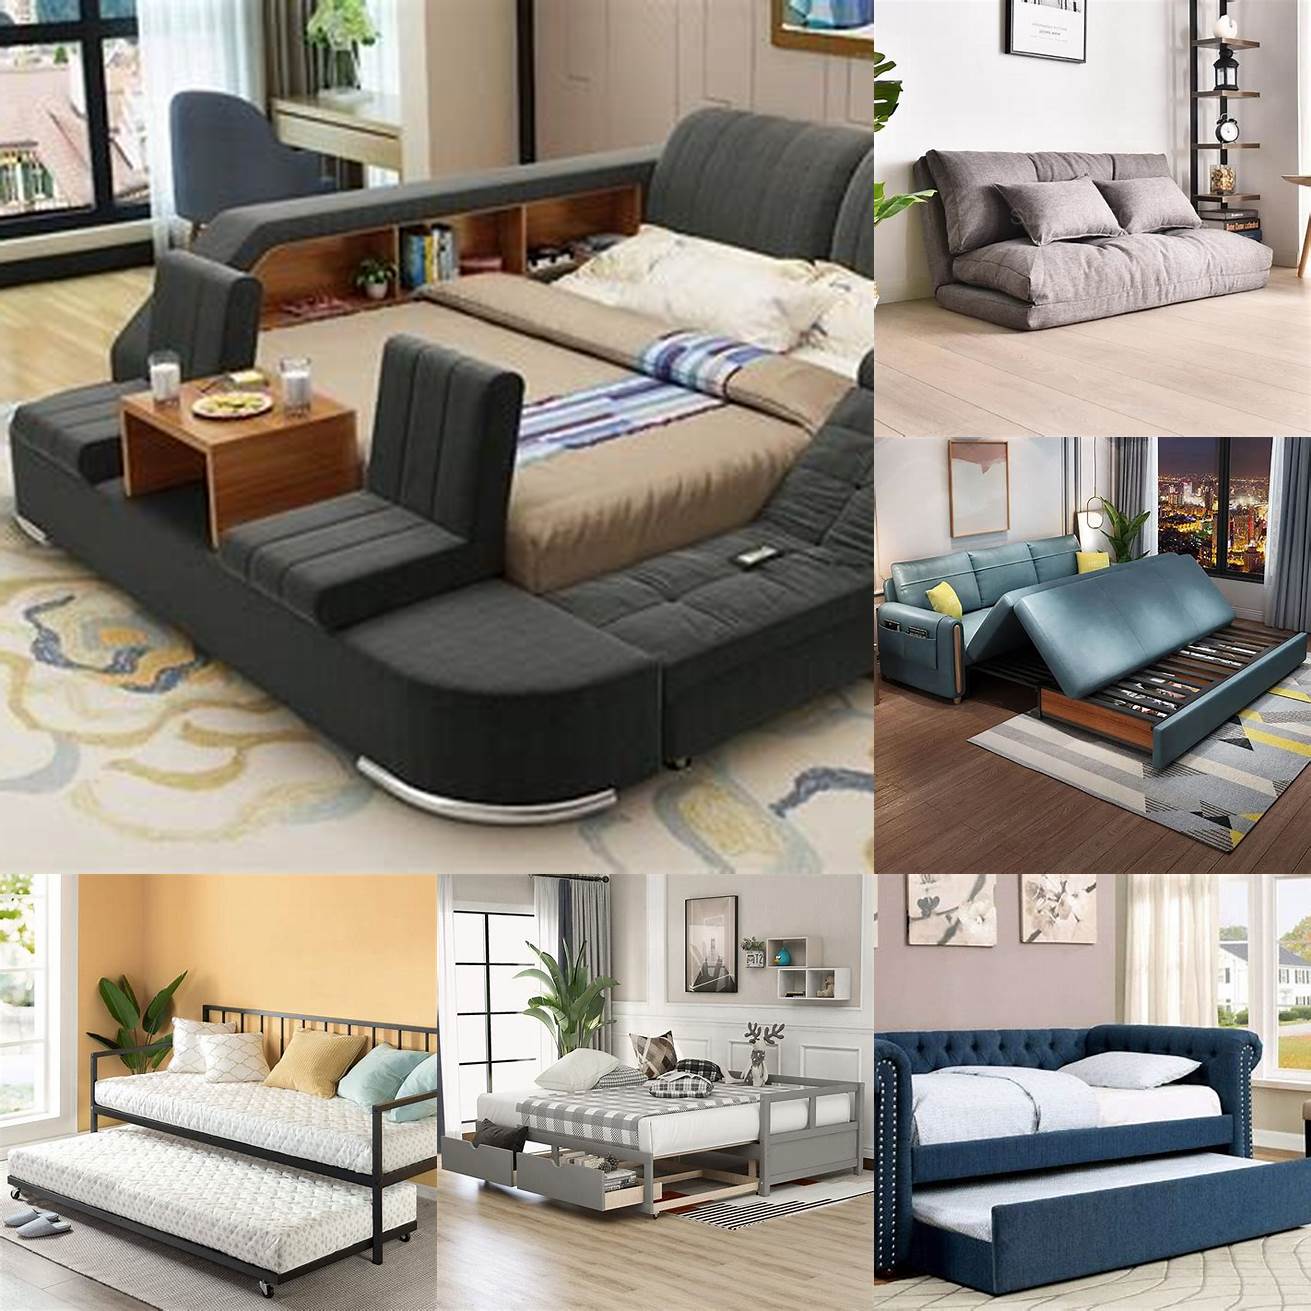 Multi-functional A bedroom double can be used as a bed a sofa or even a guest bed Its perfect for people who want to maximize their living area without sacrificing comfort